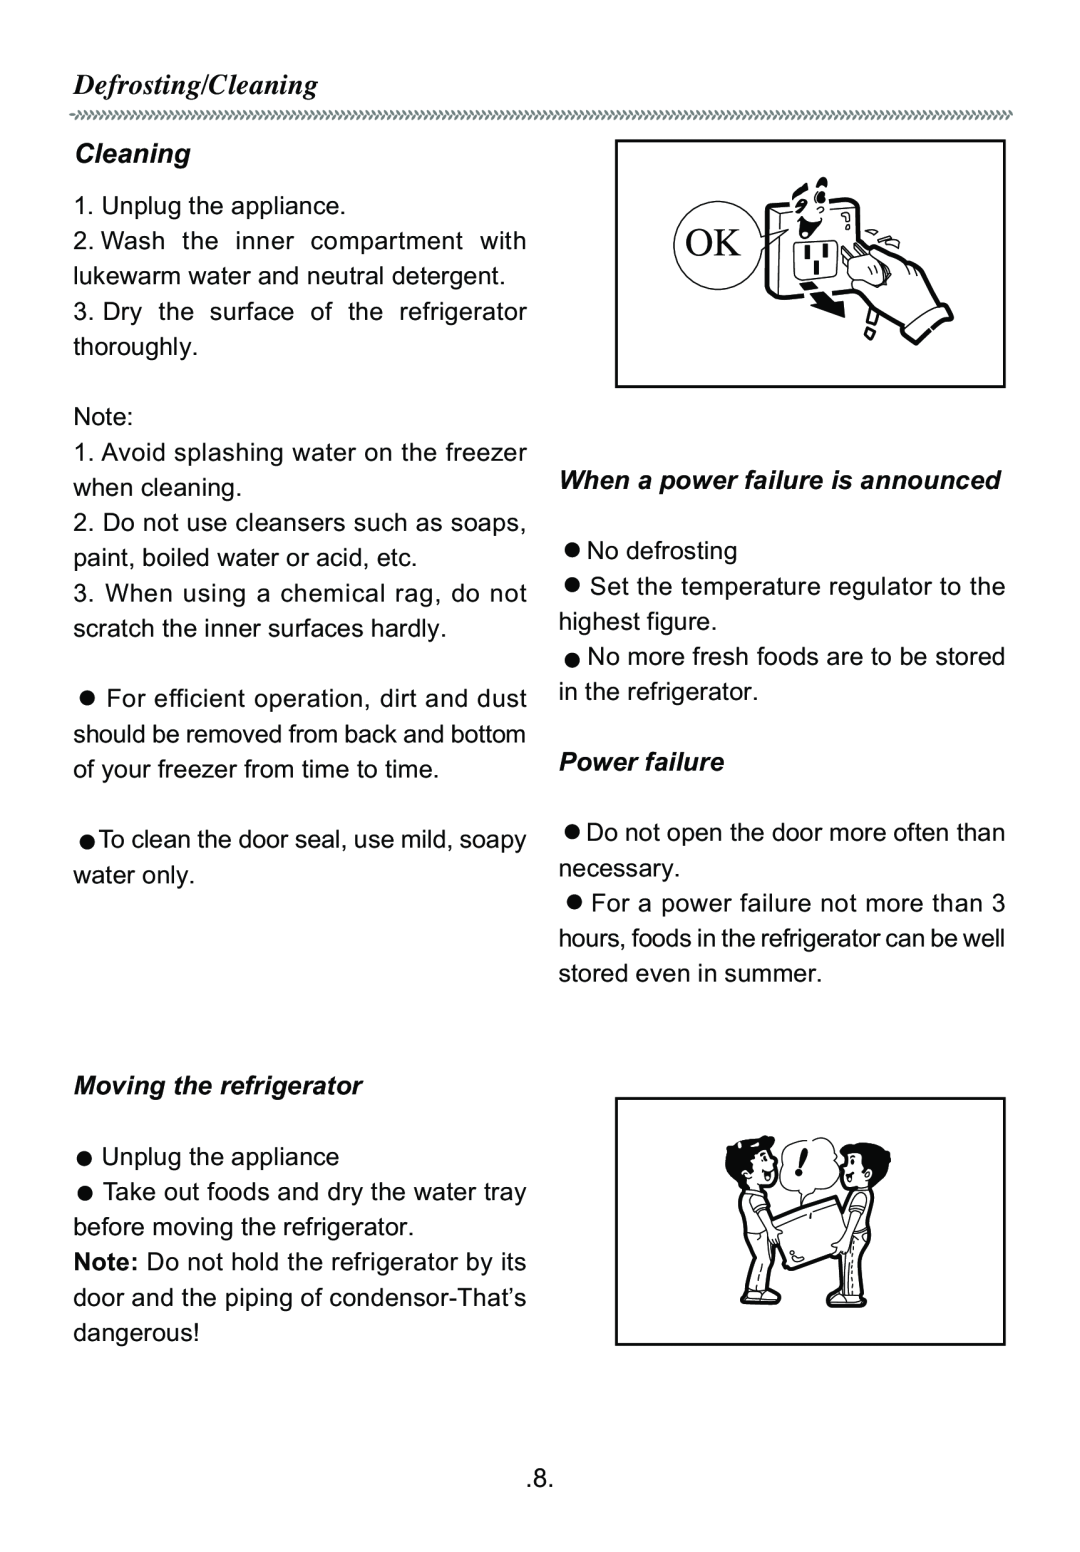 Haier BC-50 manual When a power failure is announced, Power failure, Moving the refrigerator, Defrosting/Cleaning 